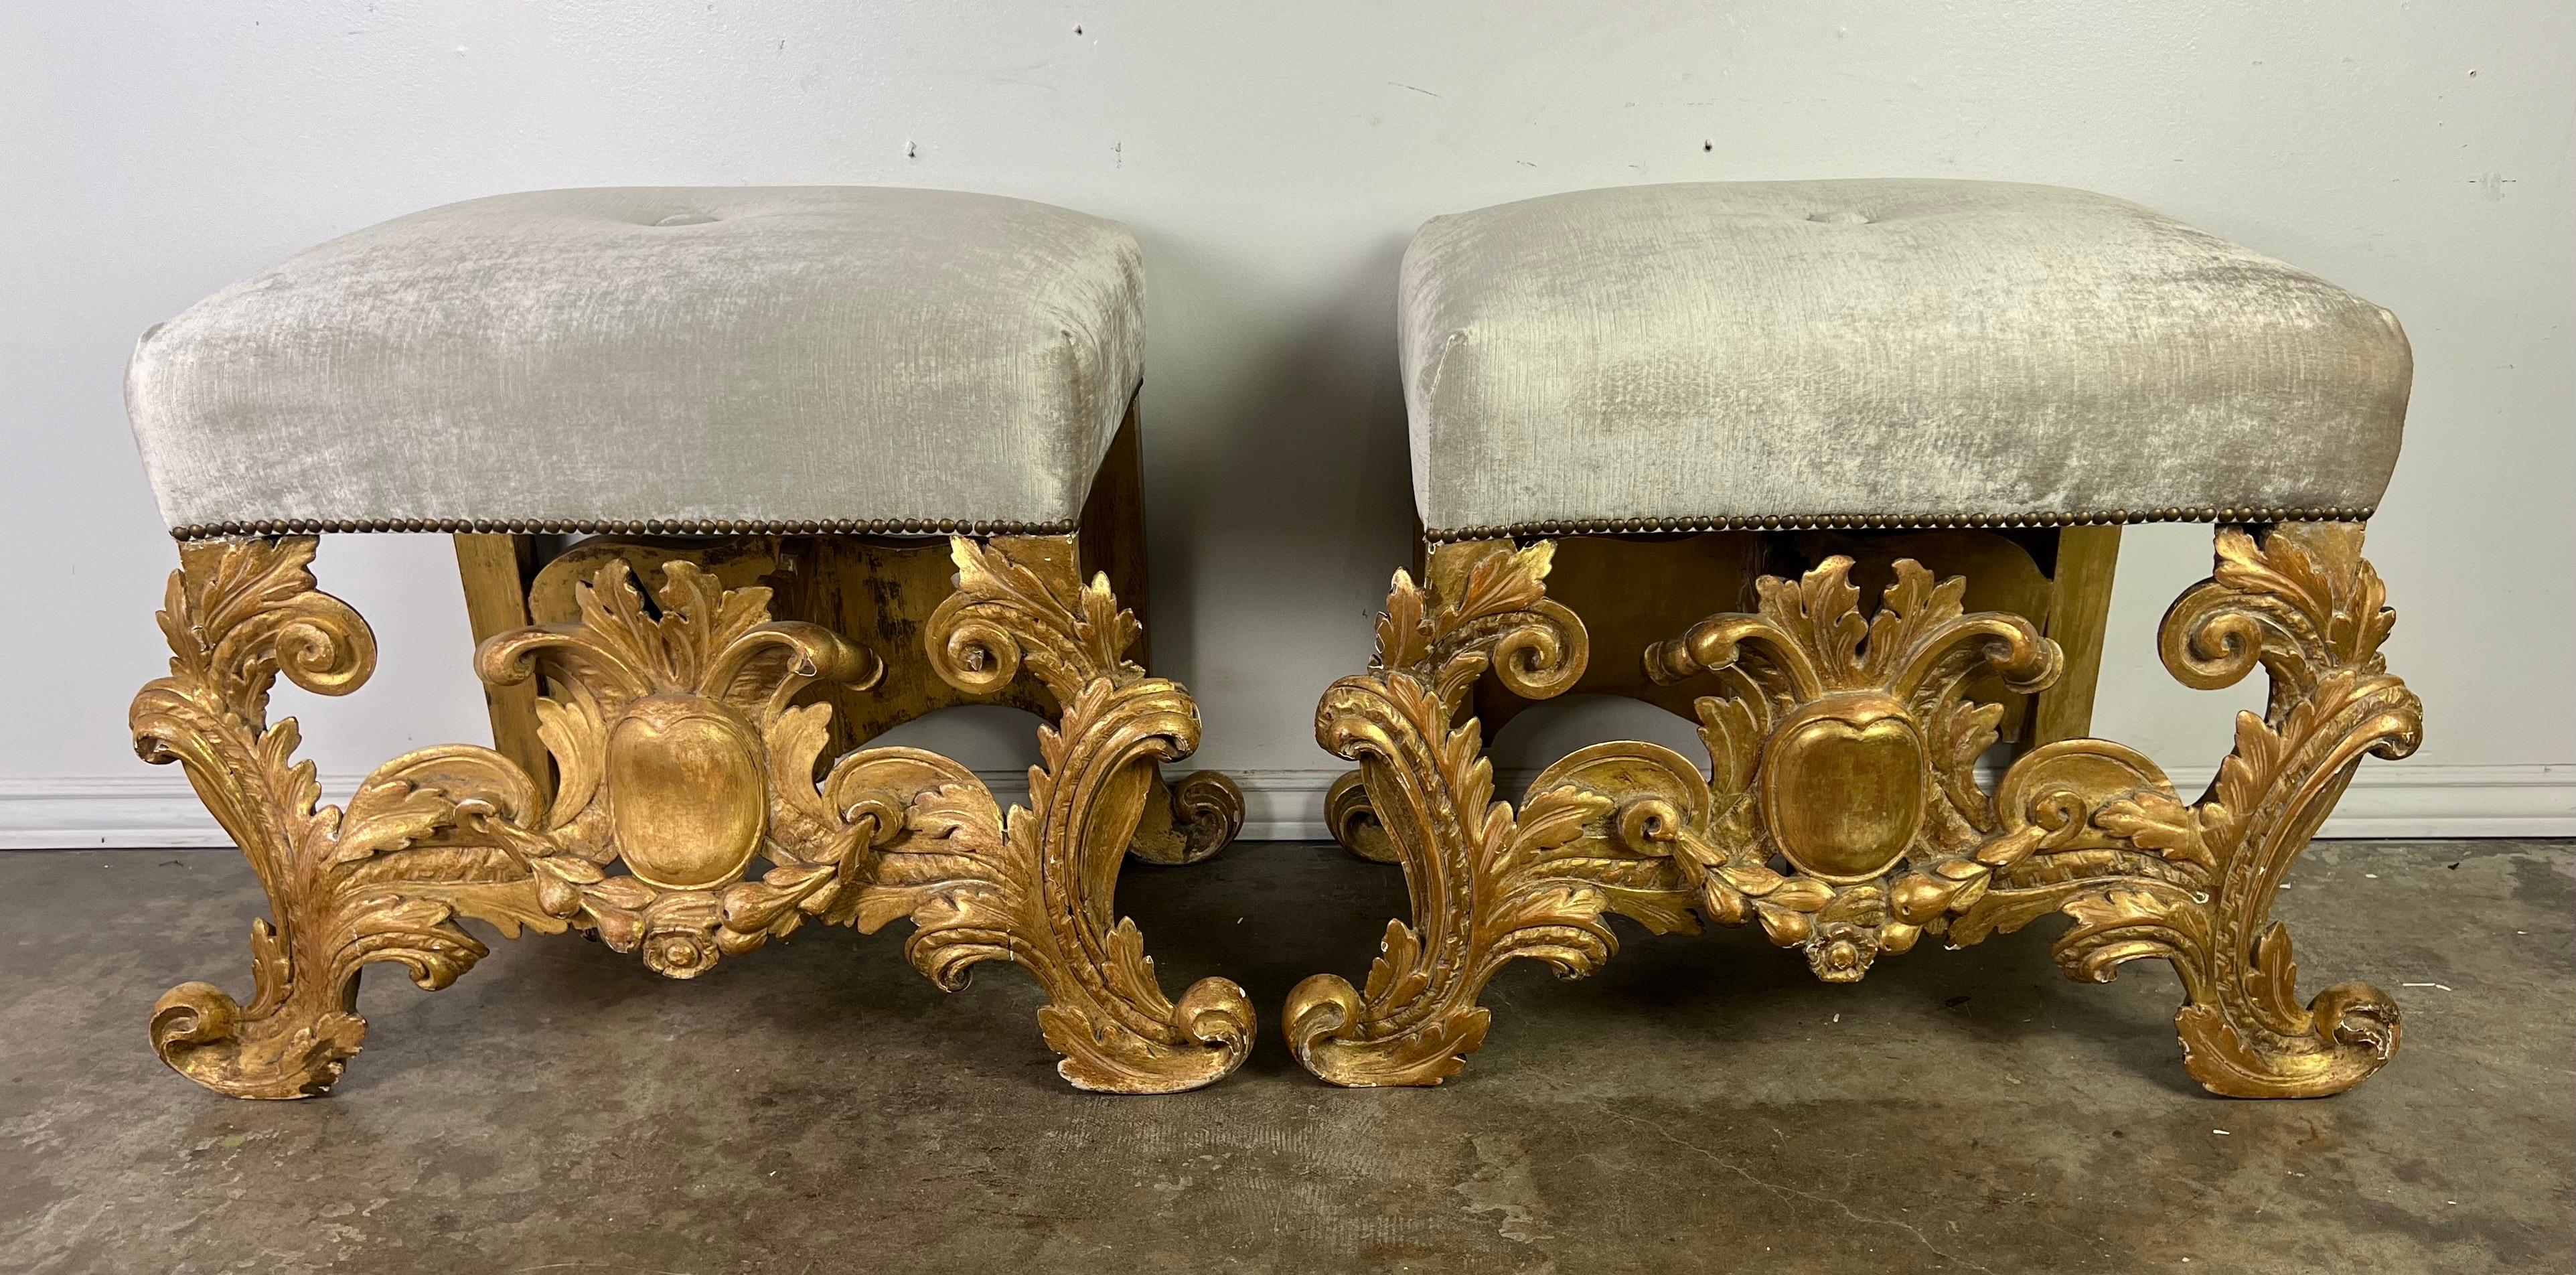 Italian Baroque style benches, each radiating the opulence and grandeur of the period.  These benches are a testament to the lavish aesthetics of the Baroque ers, with their gilt wood frames finished in 22-carat gold leaf that glistens under the